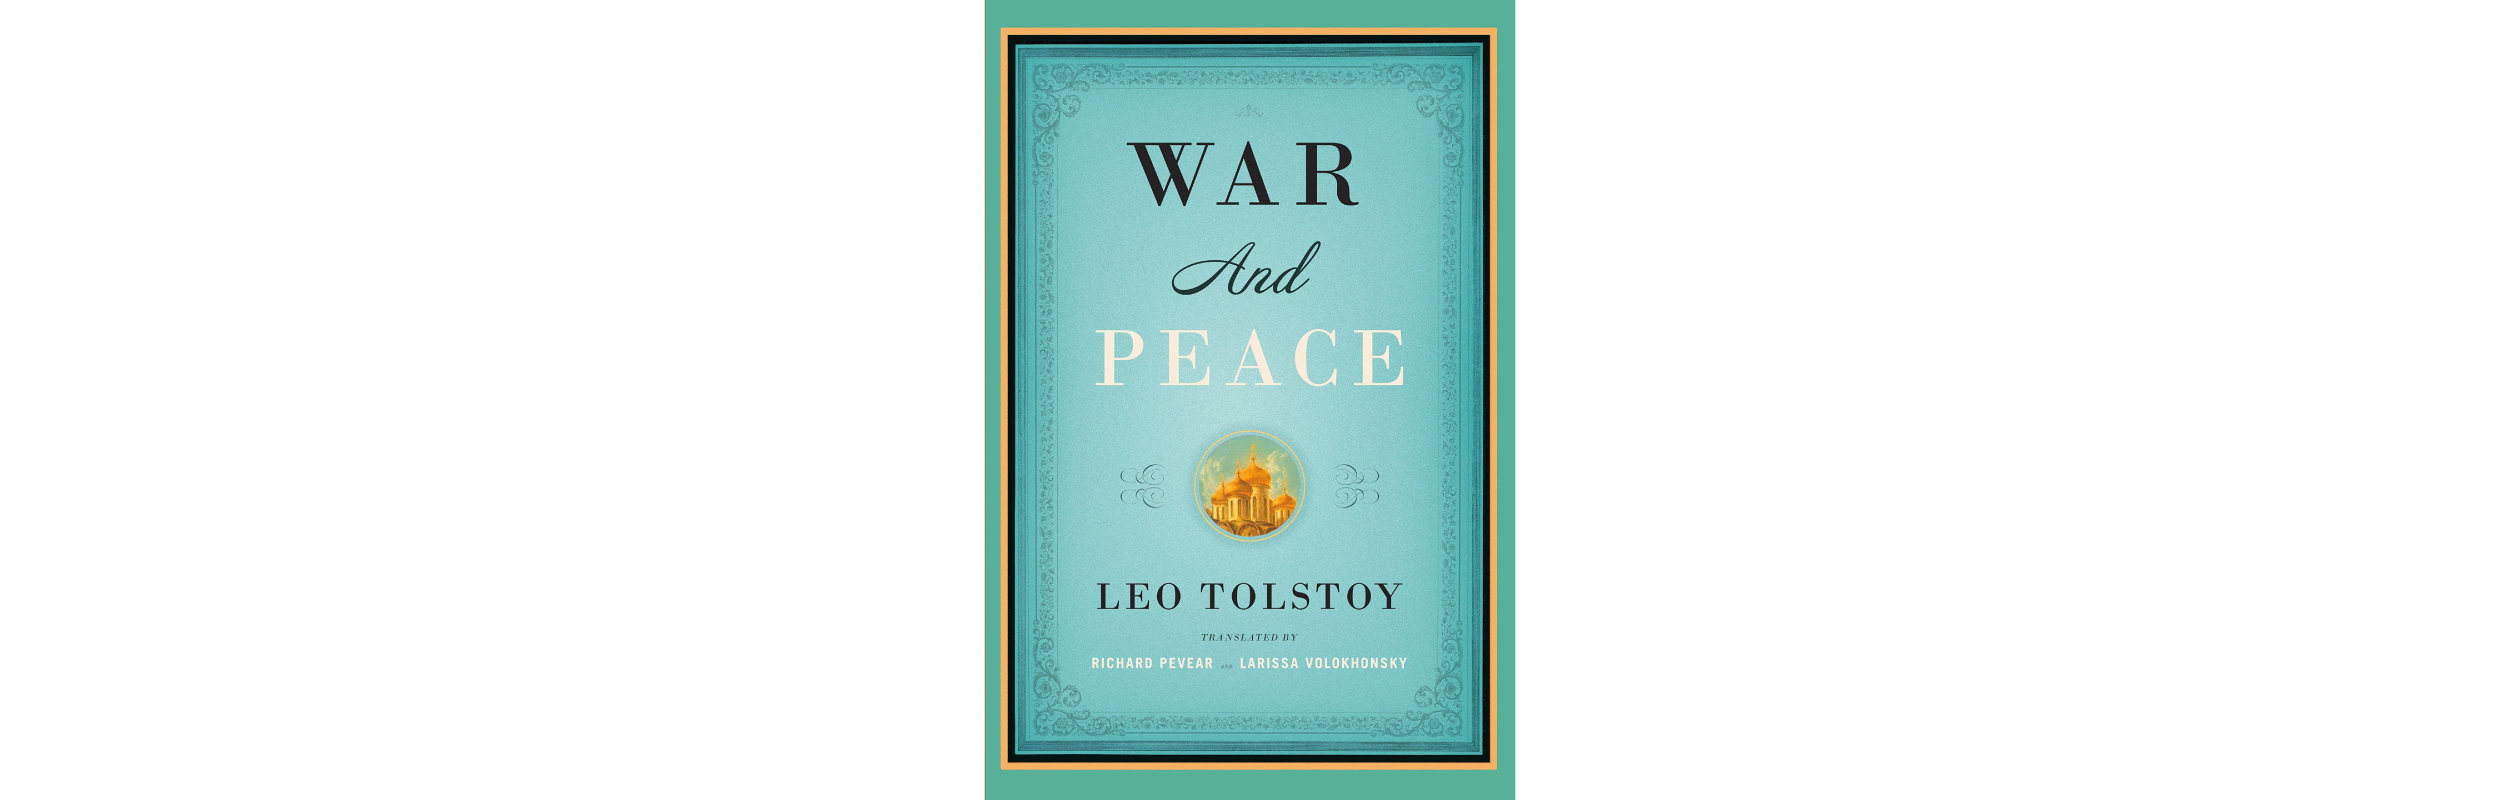 "War and Peace" book cover.